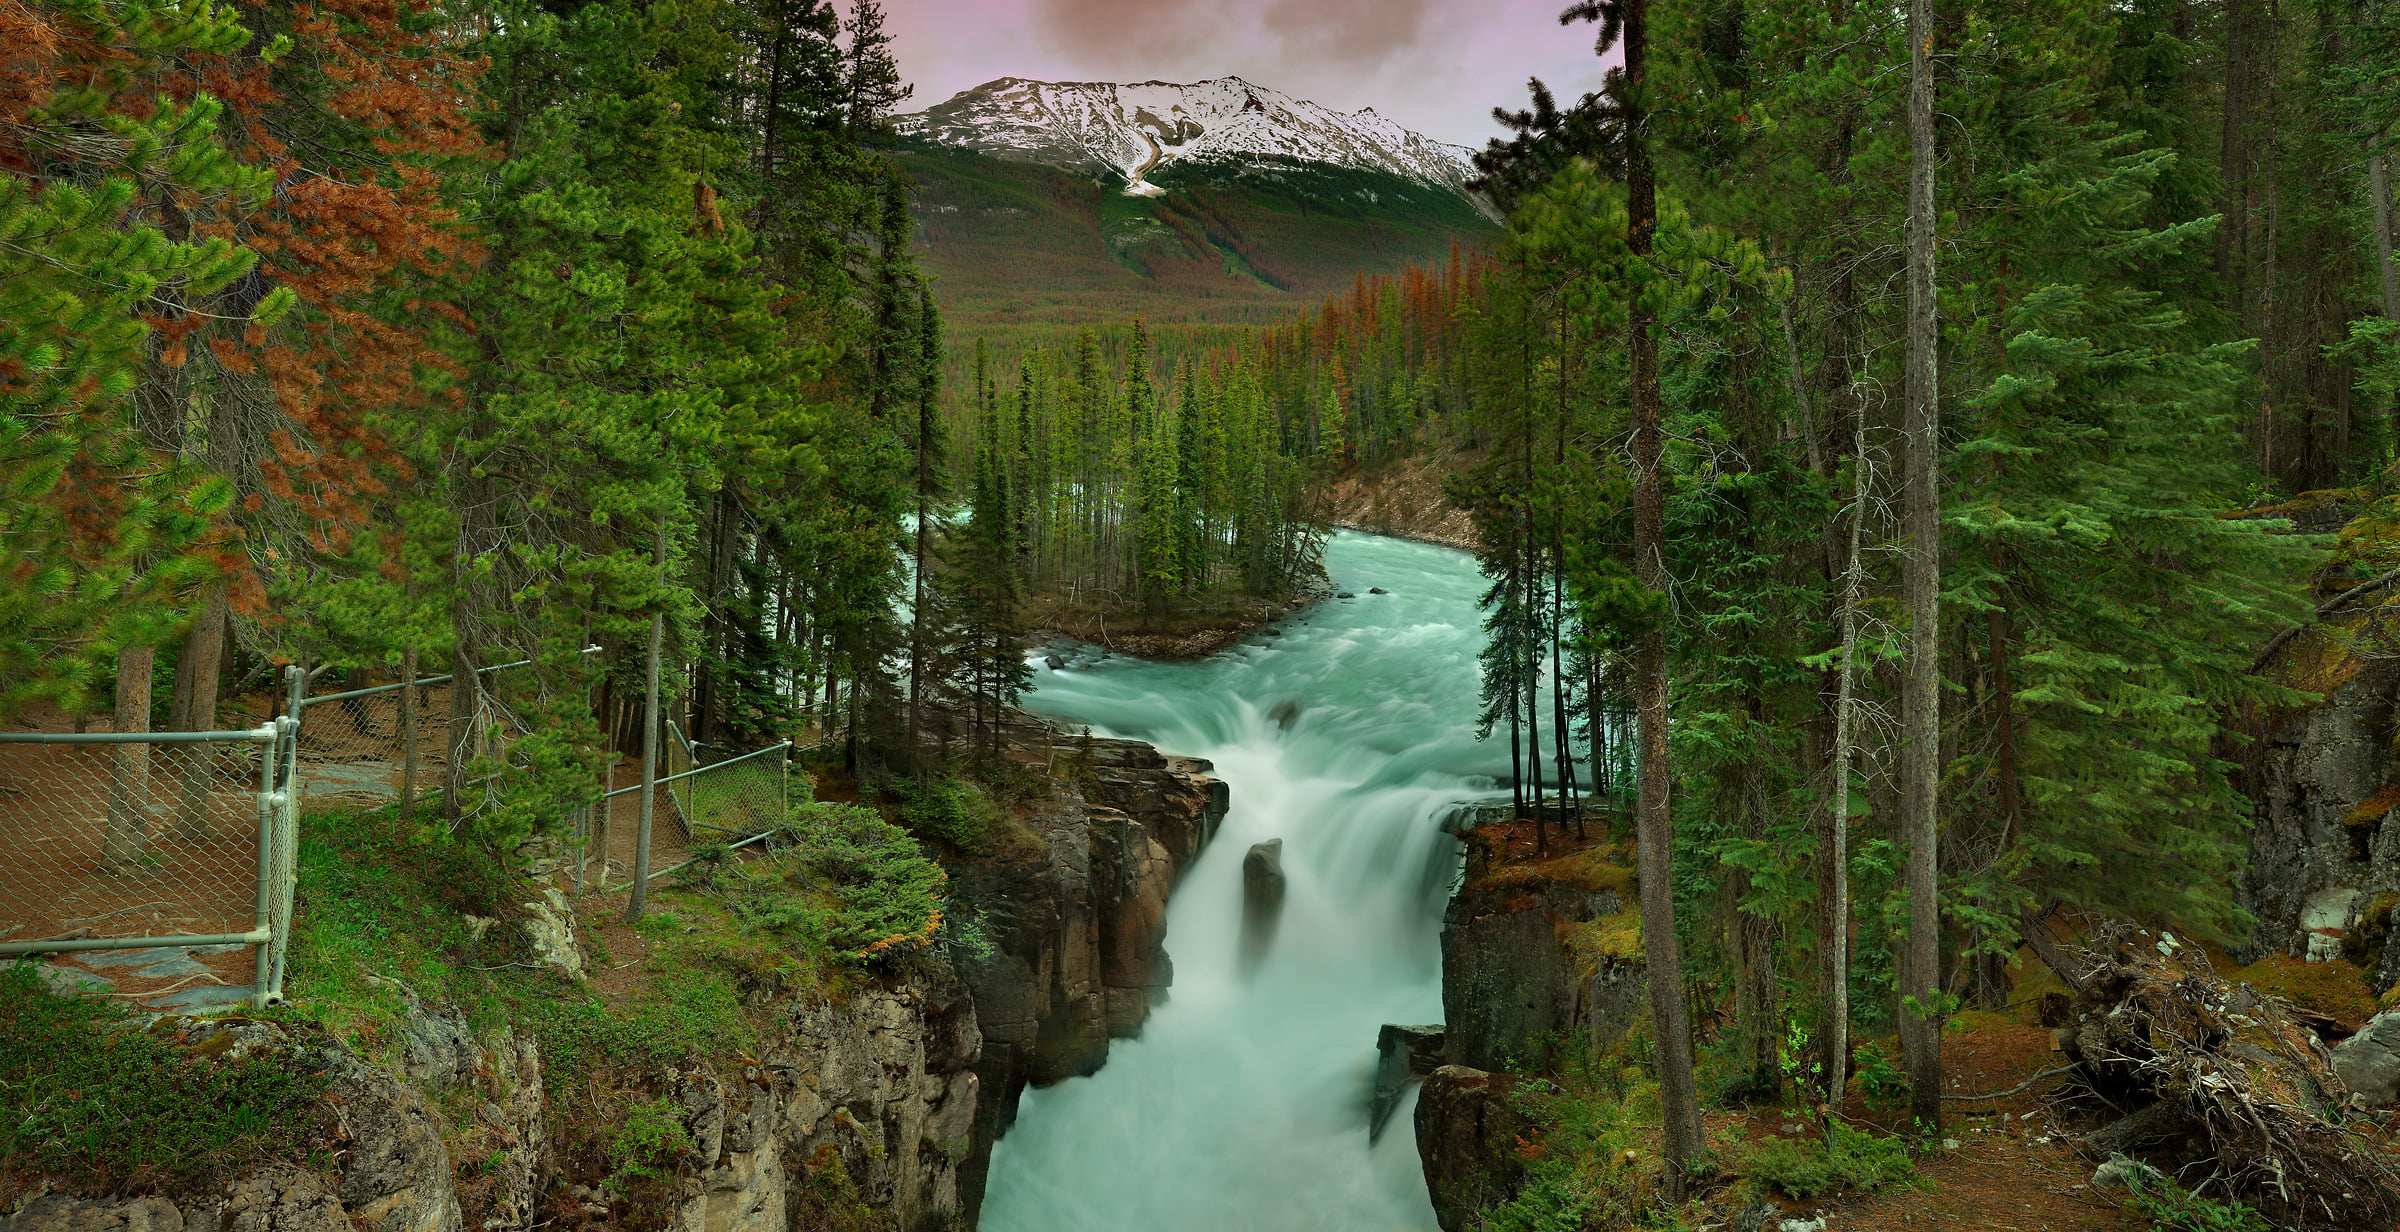 1,682 megapixels! A very high resolution, large-format VAST photo print of woods with a waterfall; nature photograph created by Steve Webster in Sunwapta Falls, Jasper National Park, Alberta Canada.